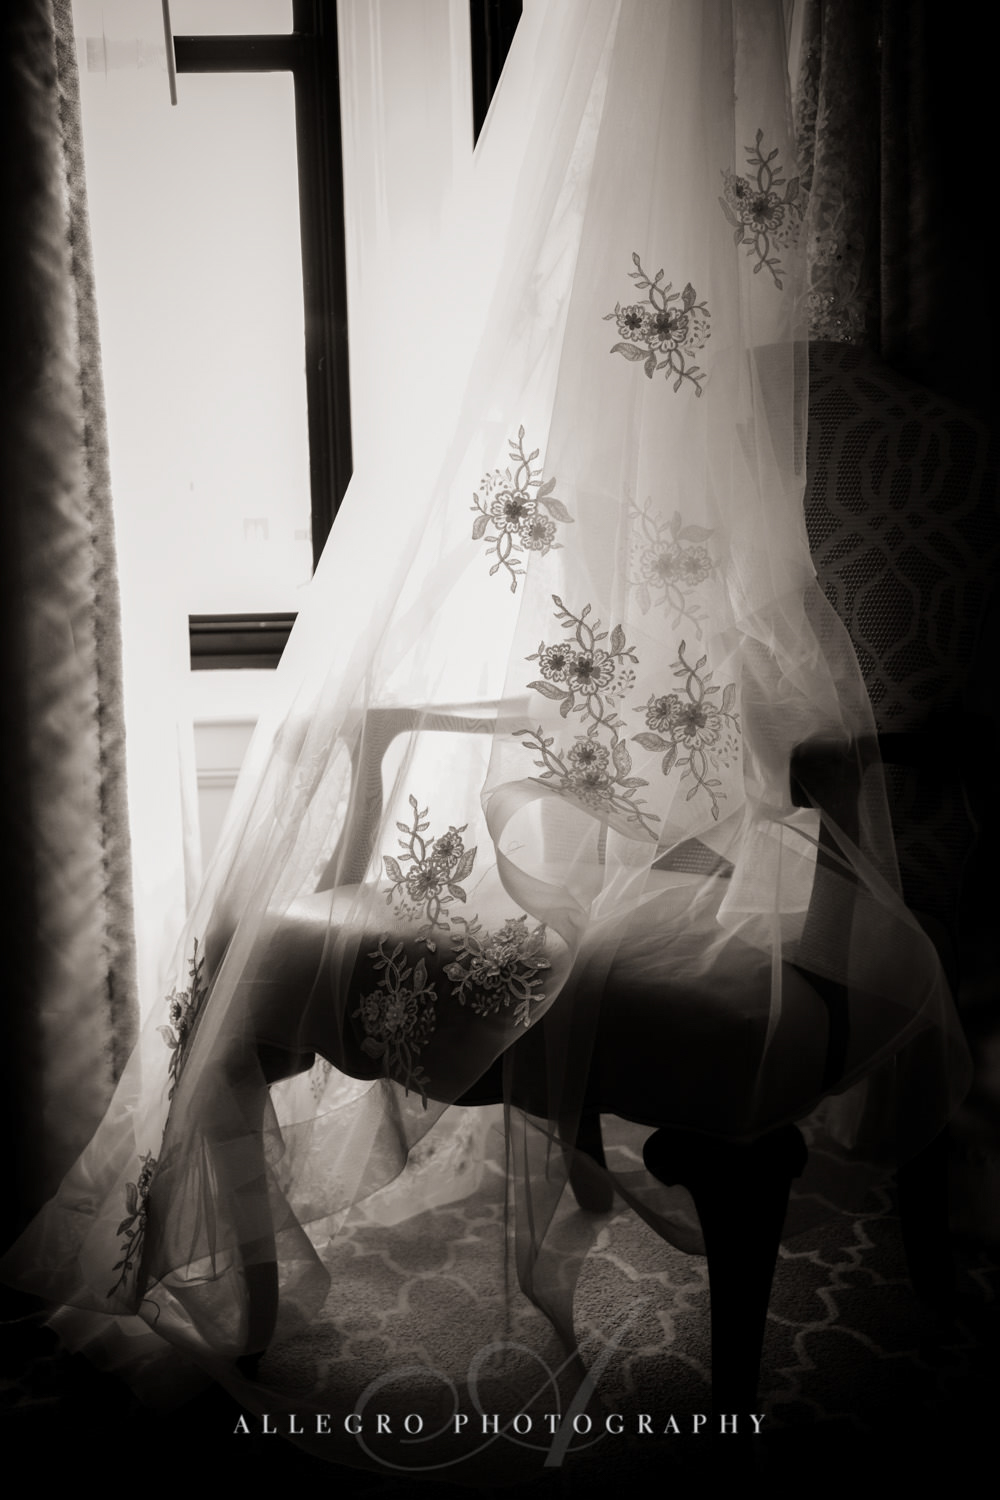 brides gown and veil draped in black and white